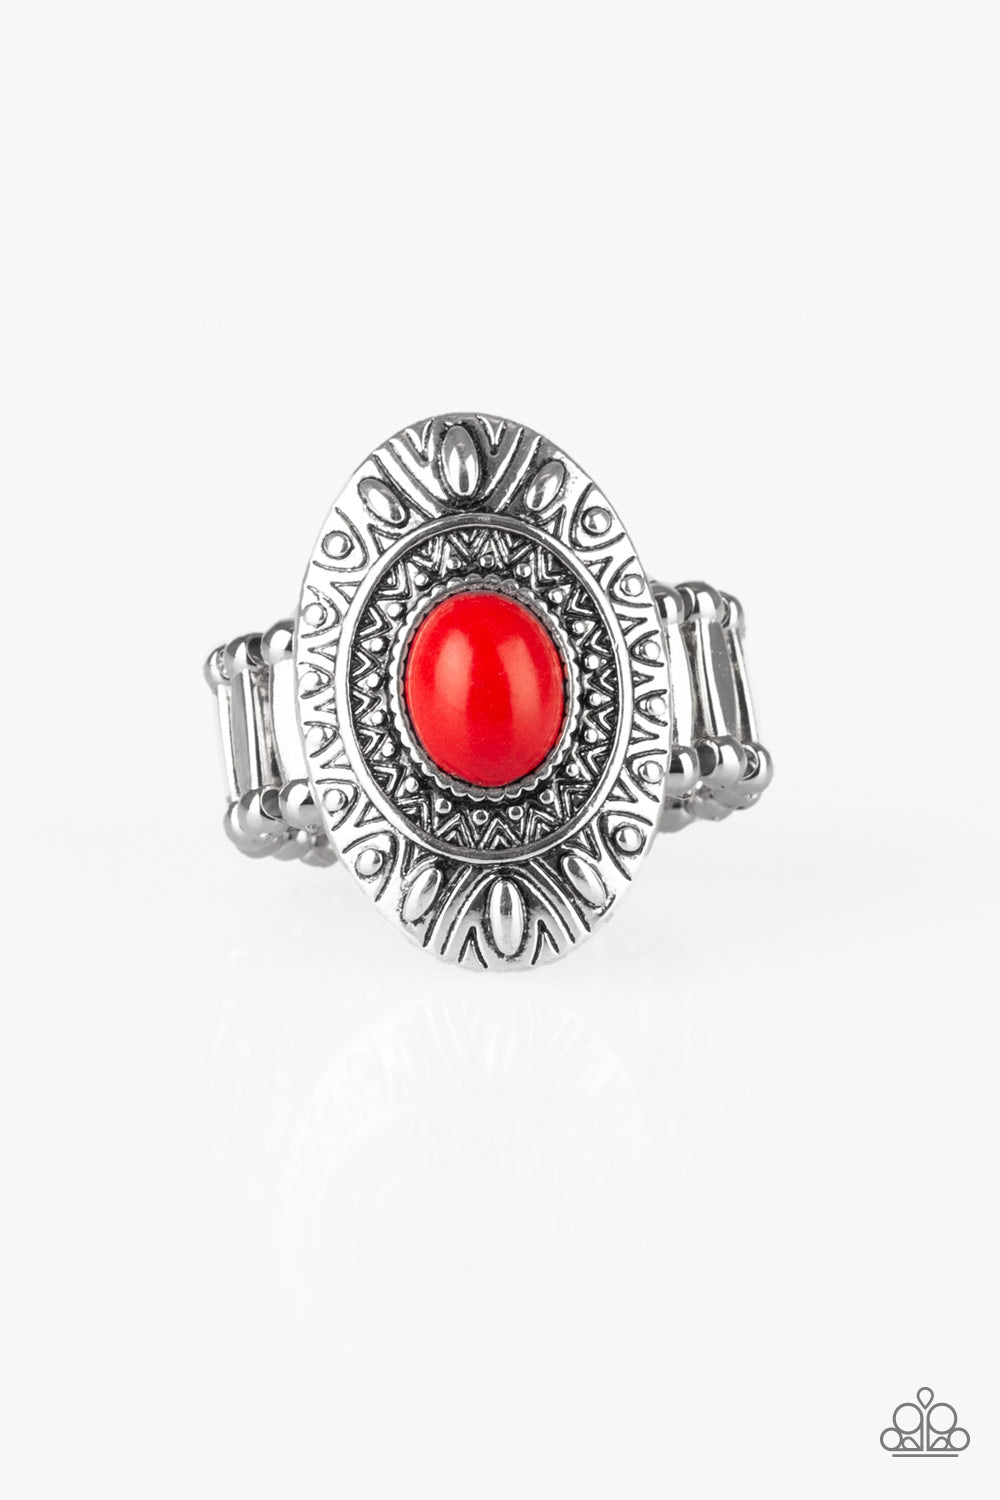 STONE FOX - RED BEAD SILVER TRIBAL RING